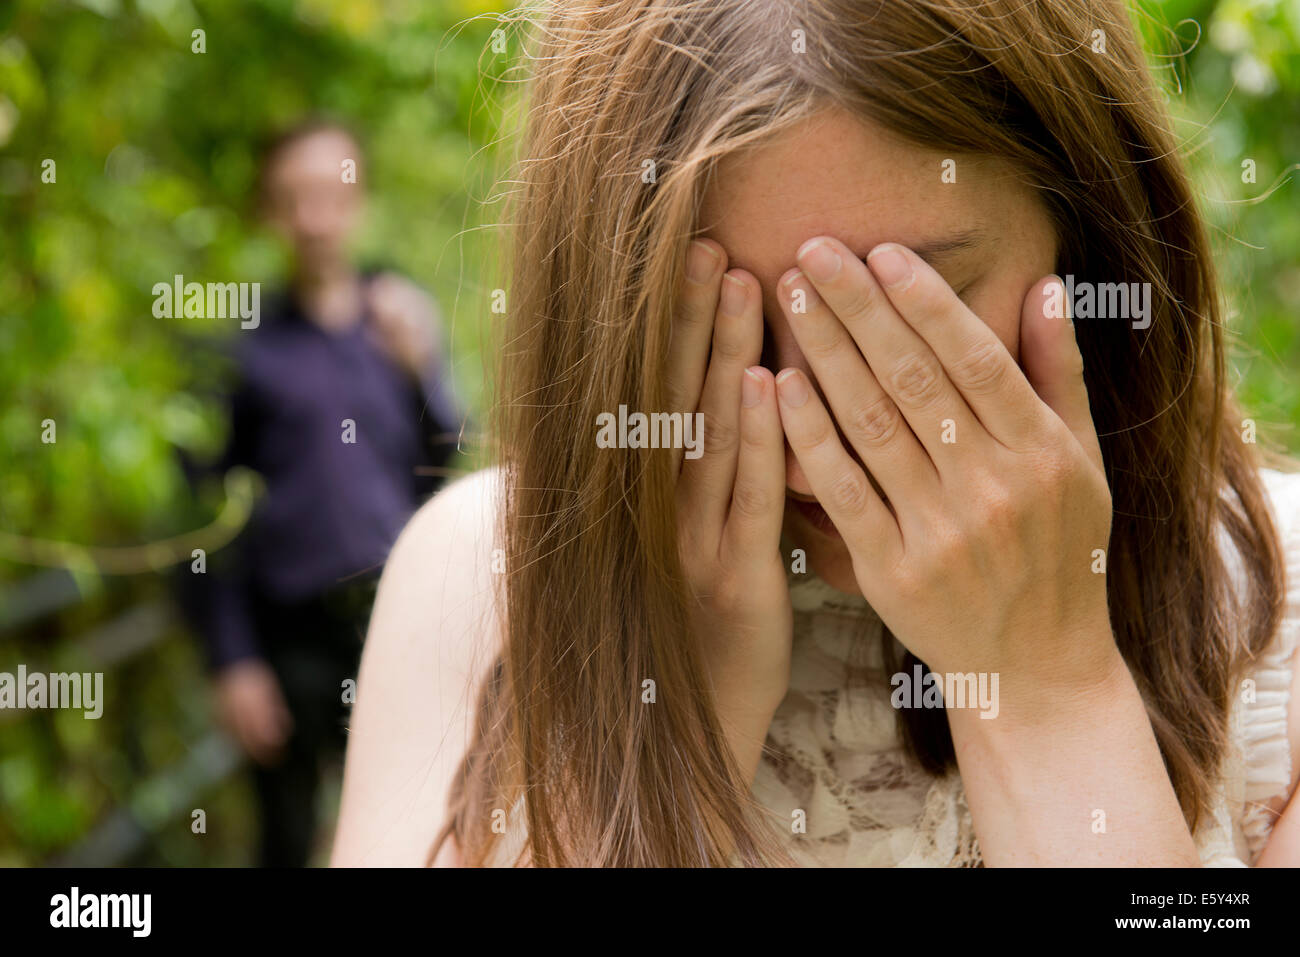 Tearful woman with hand on her face and man standing in the background. Stock Photo